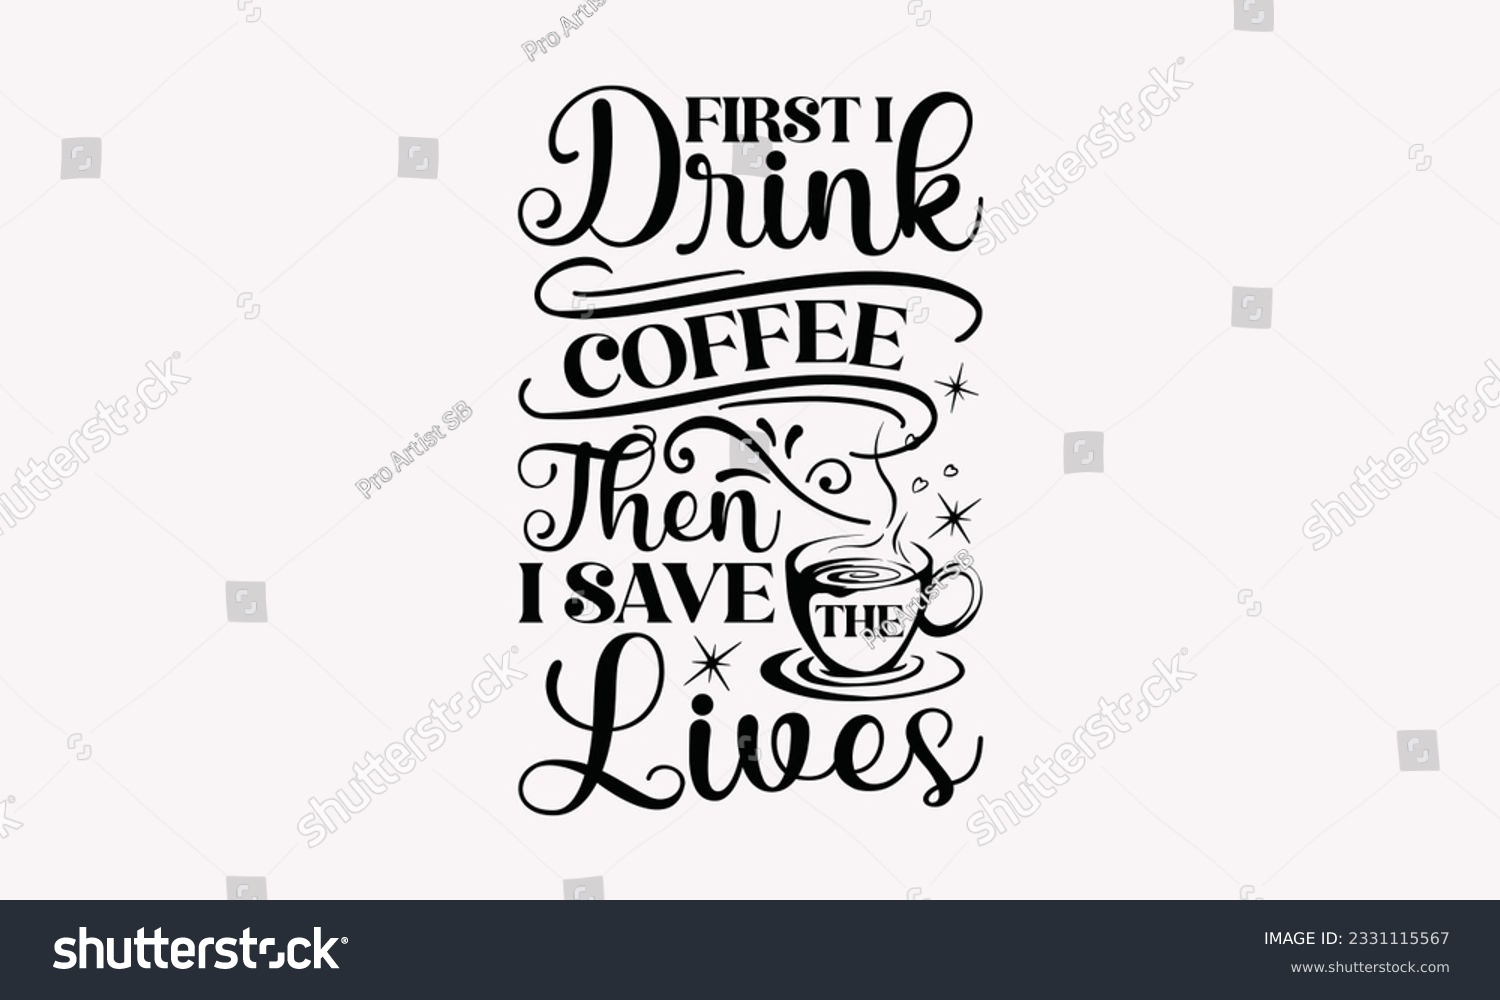 SVG of First I drink coffee then I save the lives - Coffee SVG Design Template, Cheer Quotes, Hand drawn lettering phrase, Isolated on white background. svg